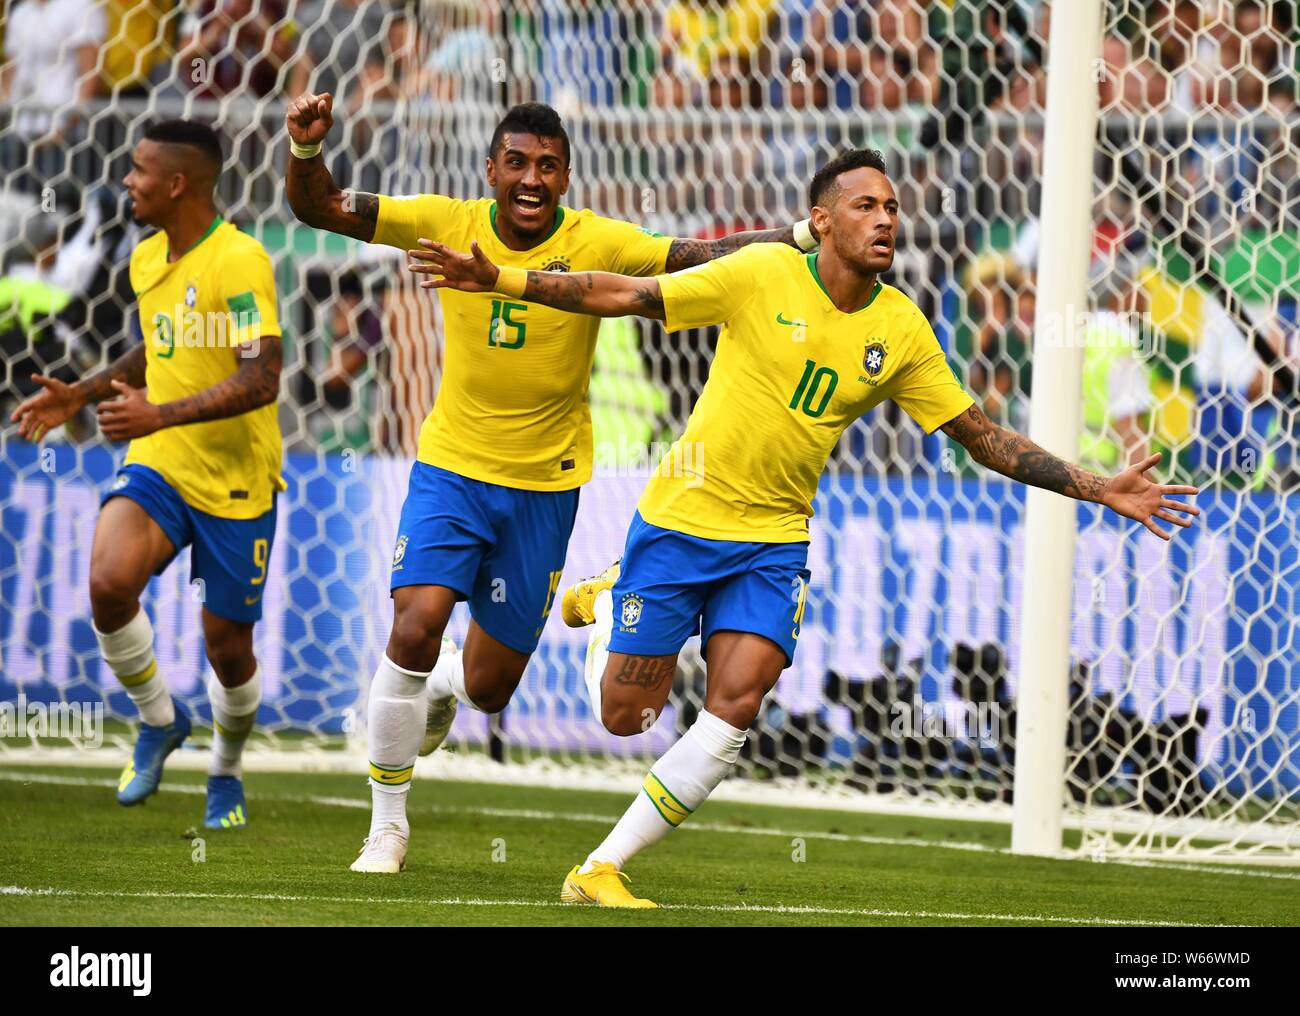 Neymar of Brazil, right, celebrates with his teammates after scoring a goal against Mexico in their Round of 16 match during the 2018 FIFA World Cup i Stock Photo